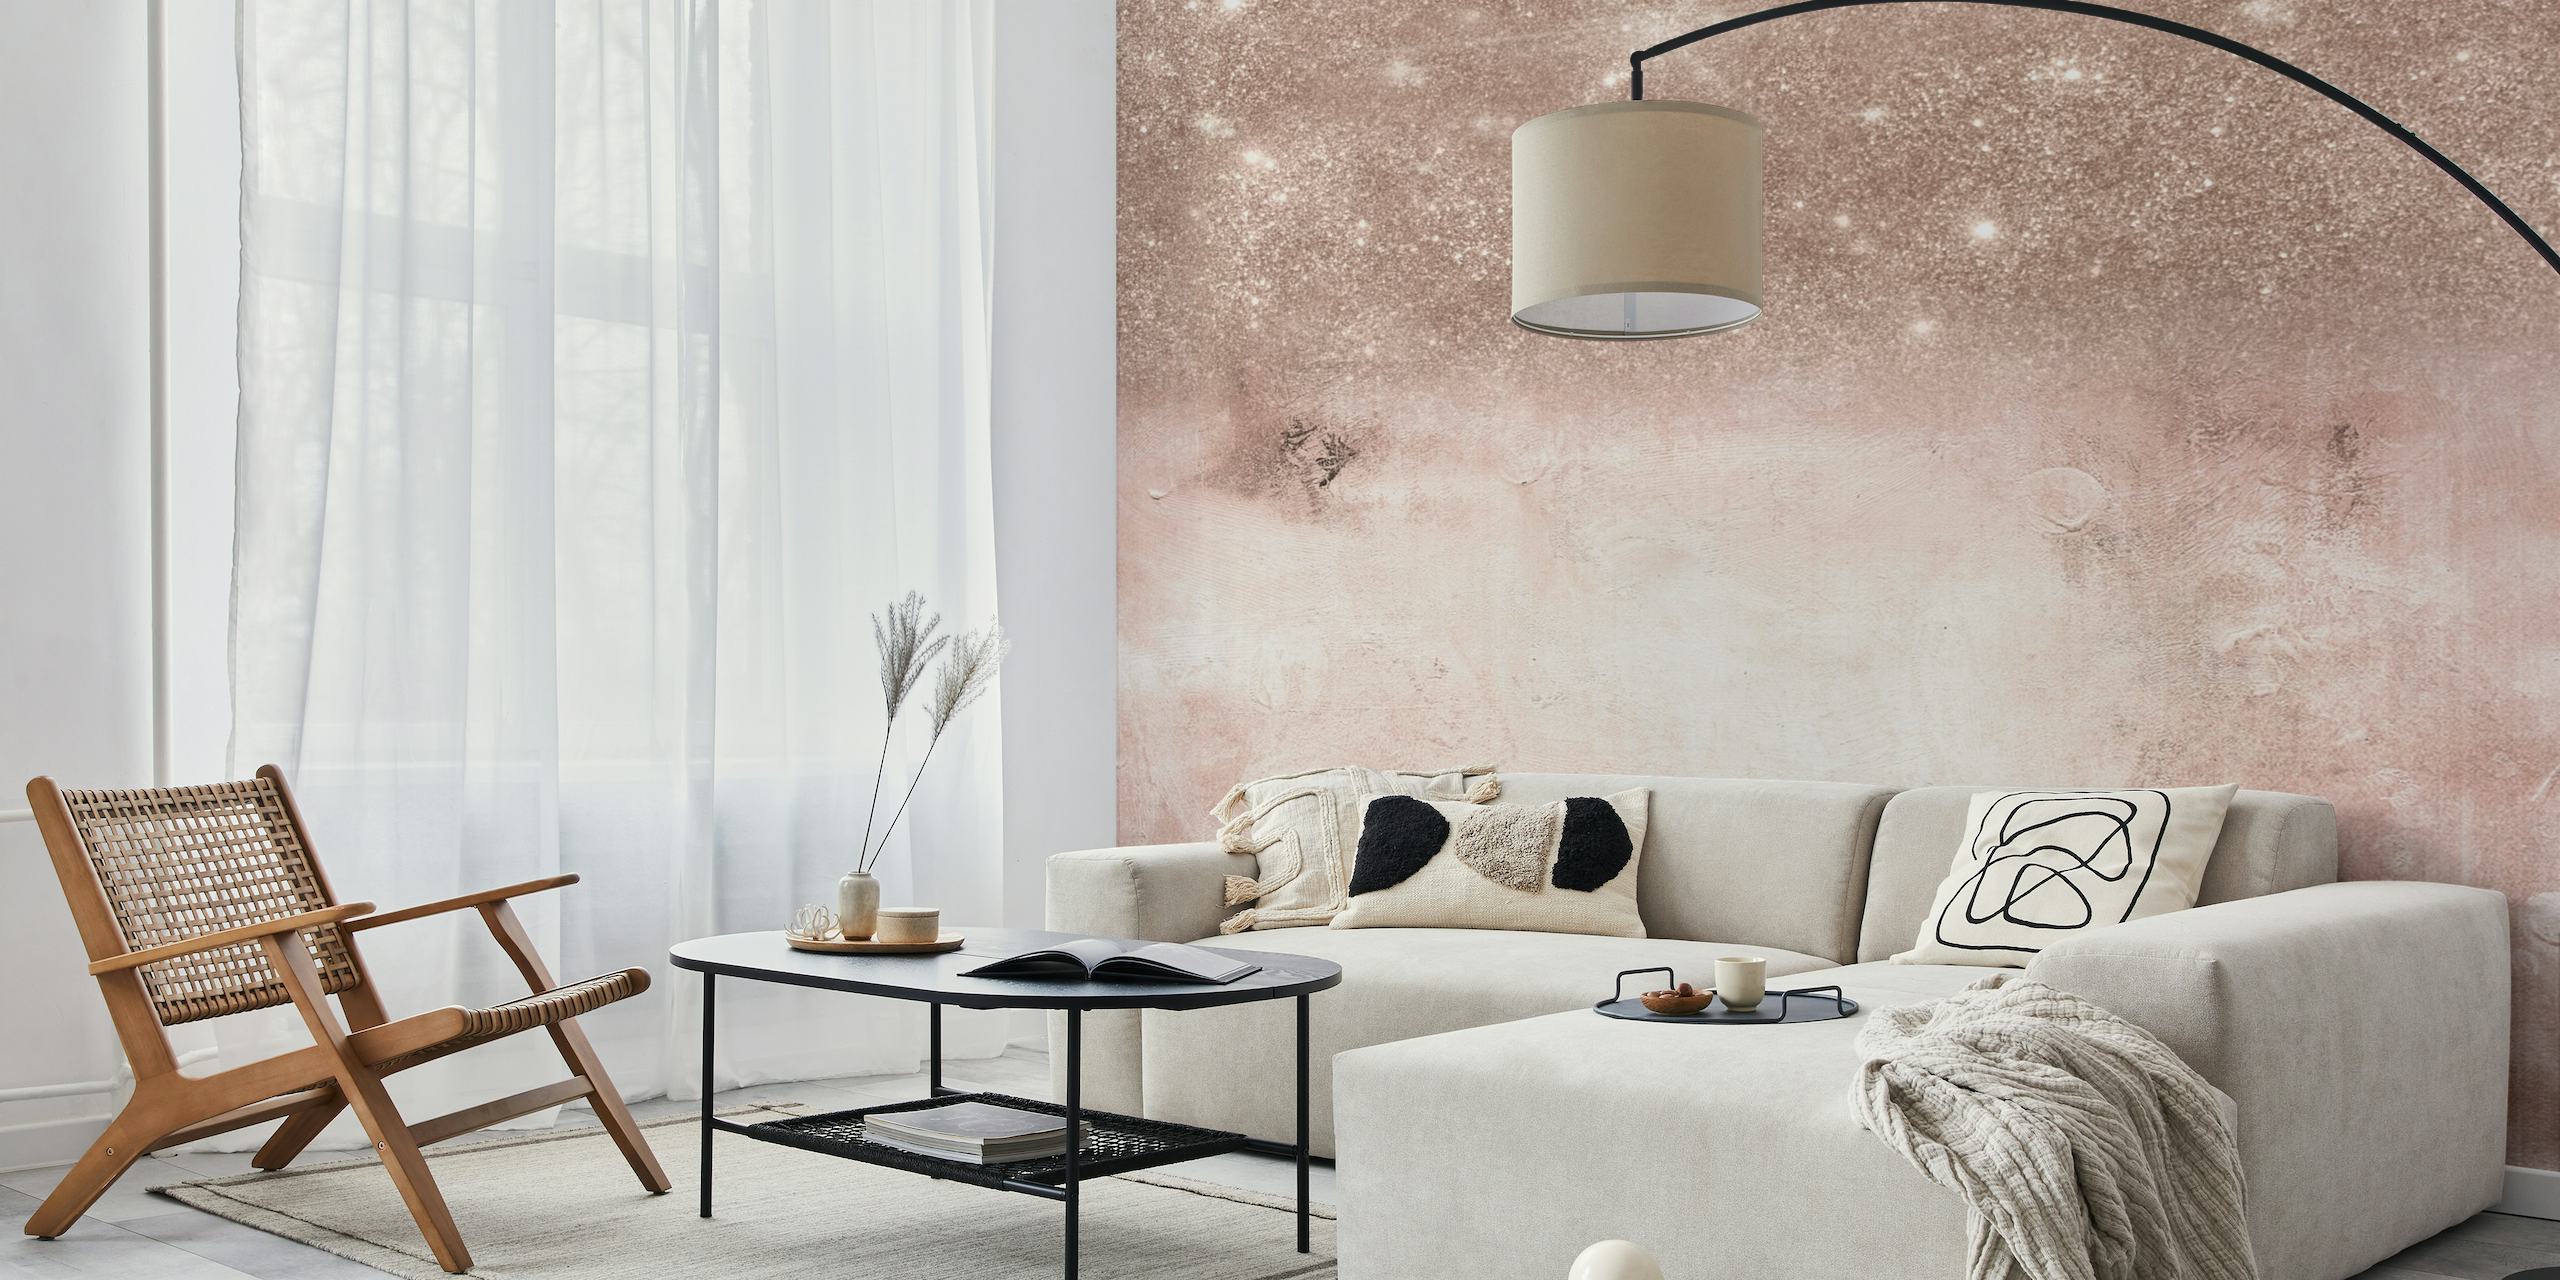 Abstract Rose Gold Glitter Wall Mural design on Concrete